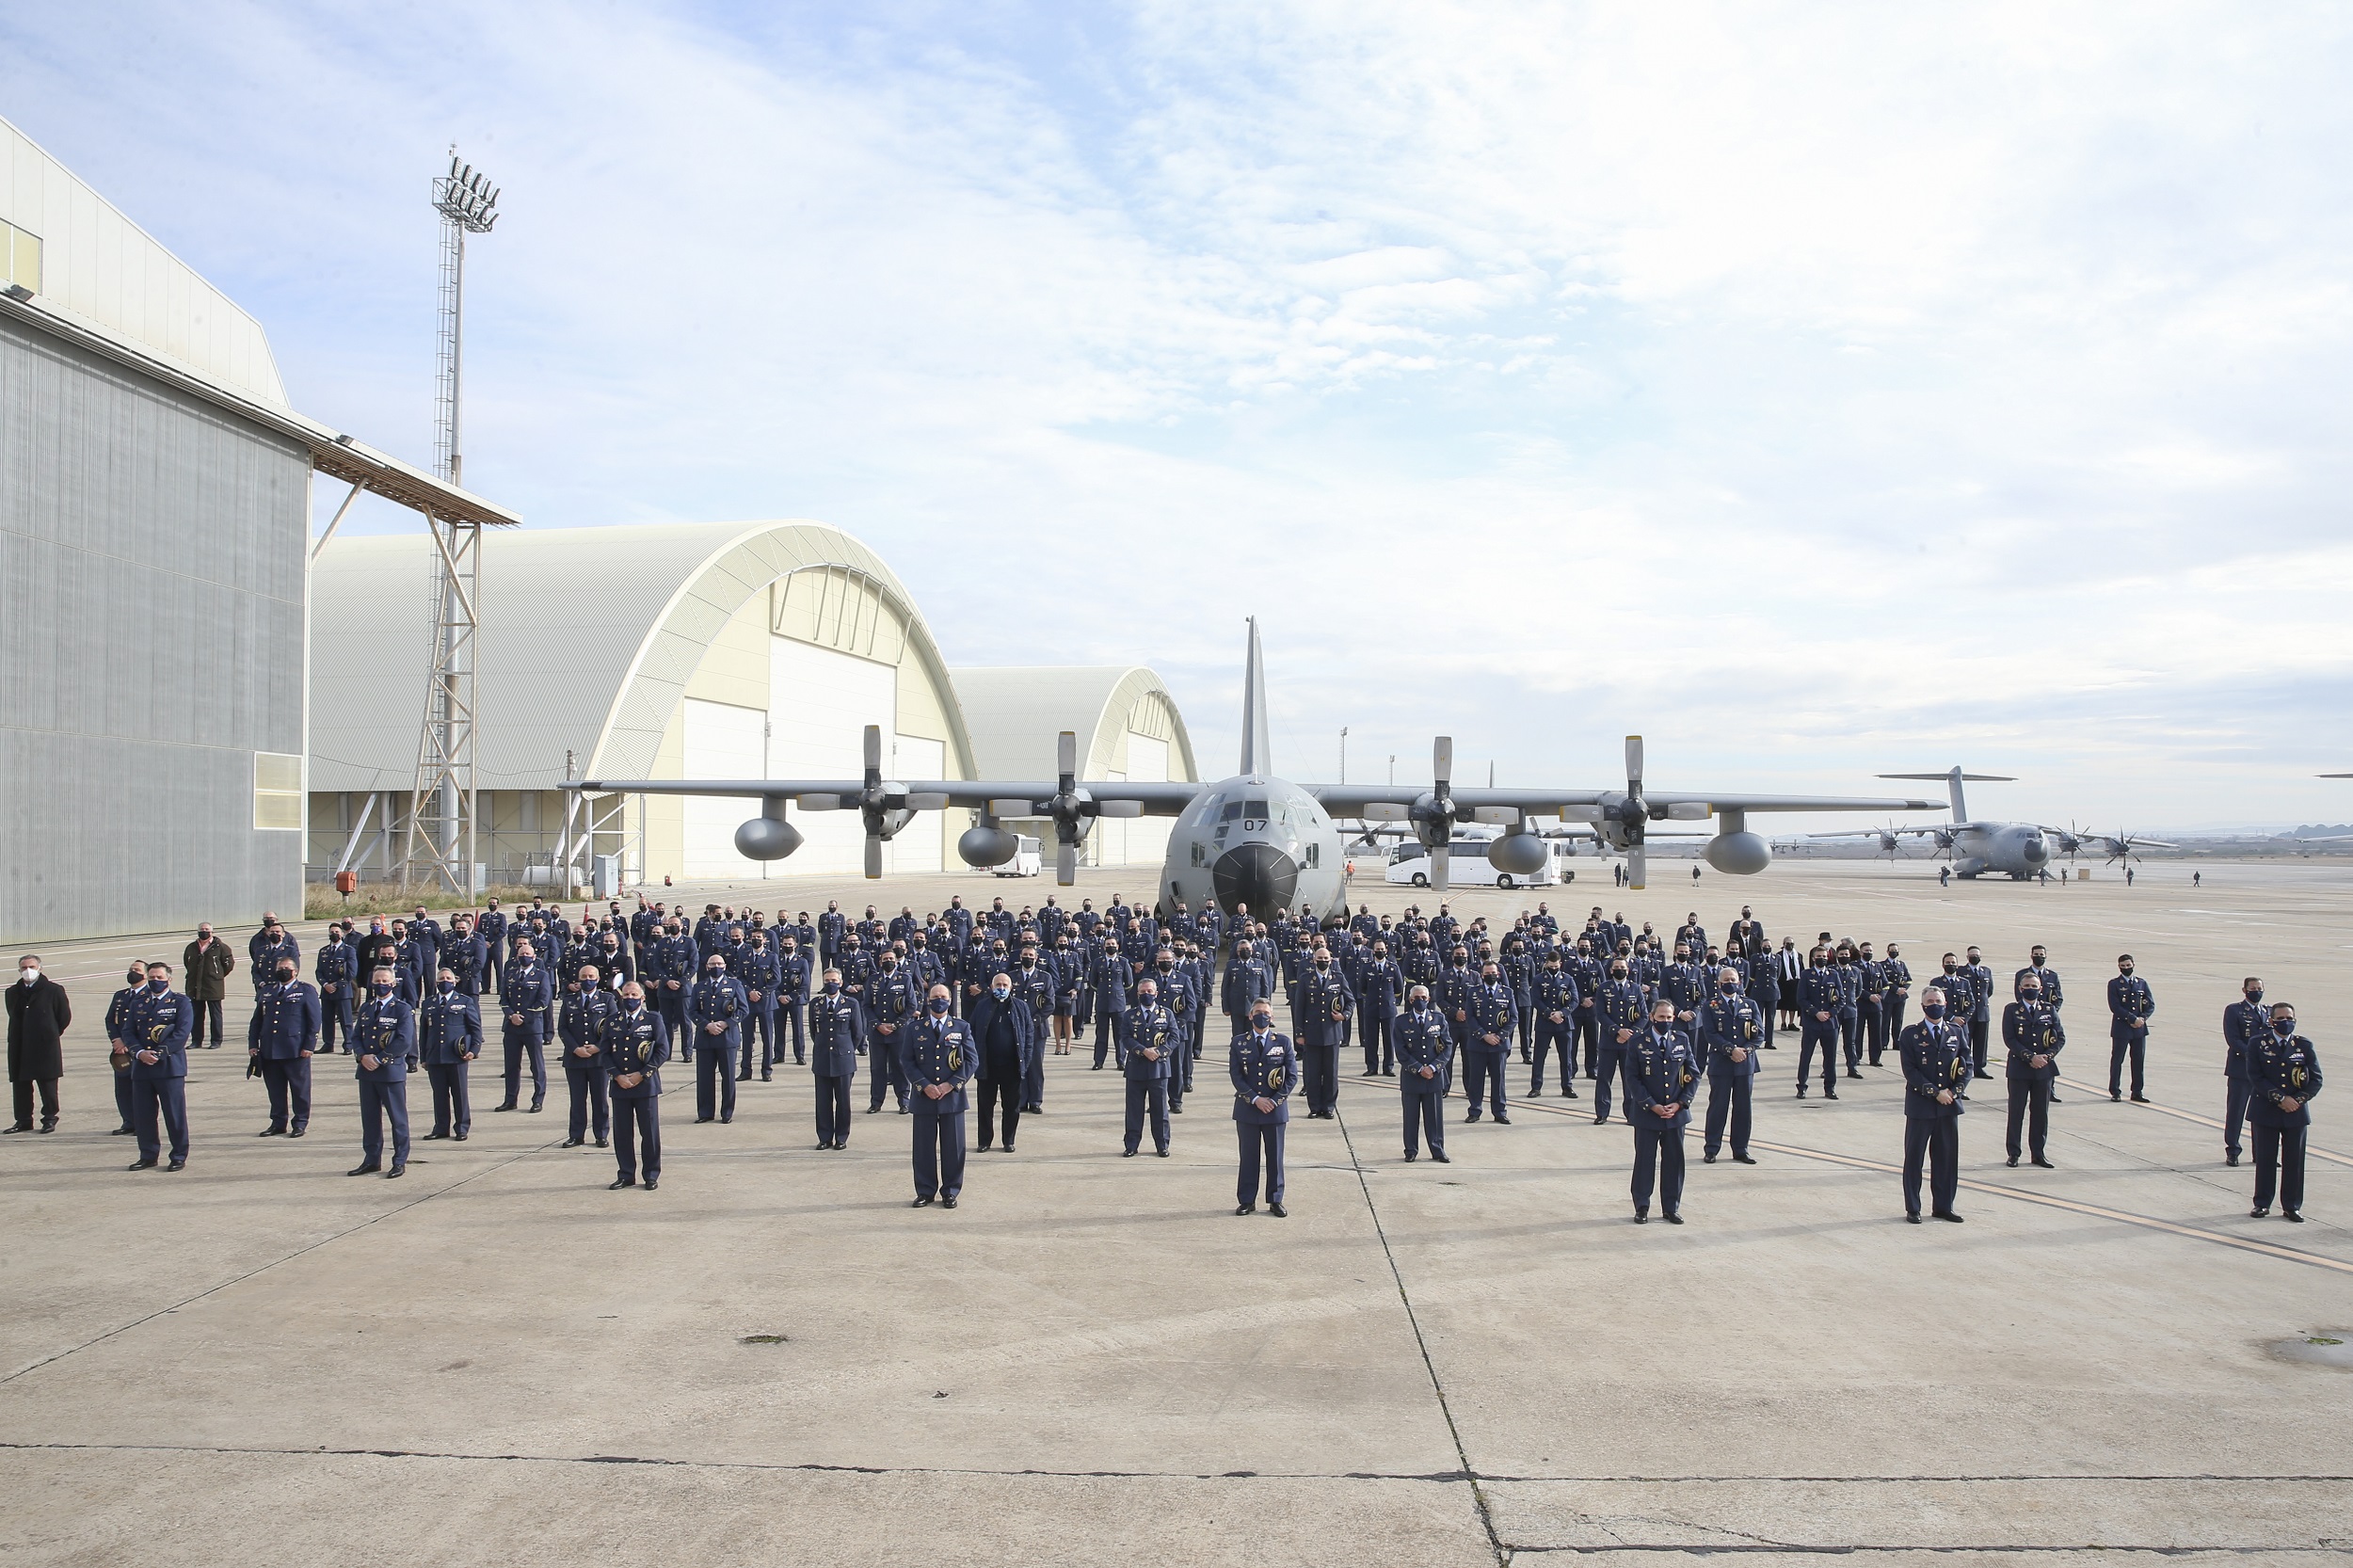 The “Dumbo” era is coming to an end: Spain decommissions the C130 Hercules.